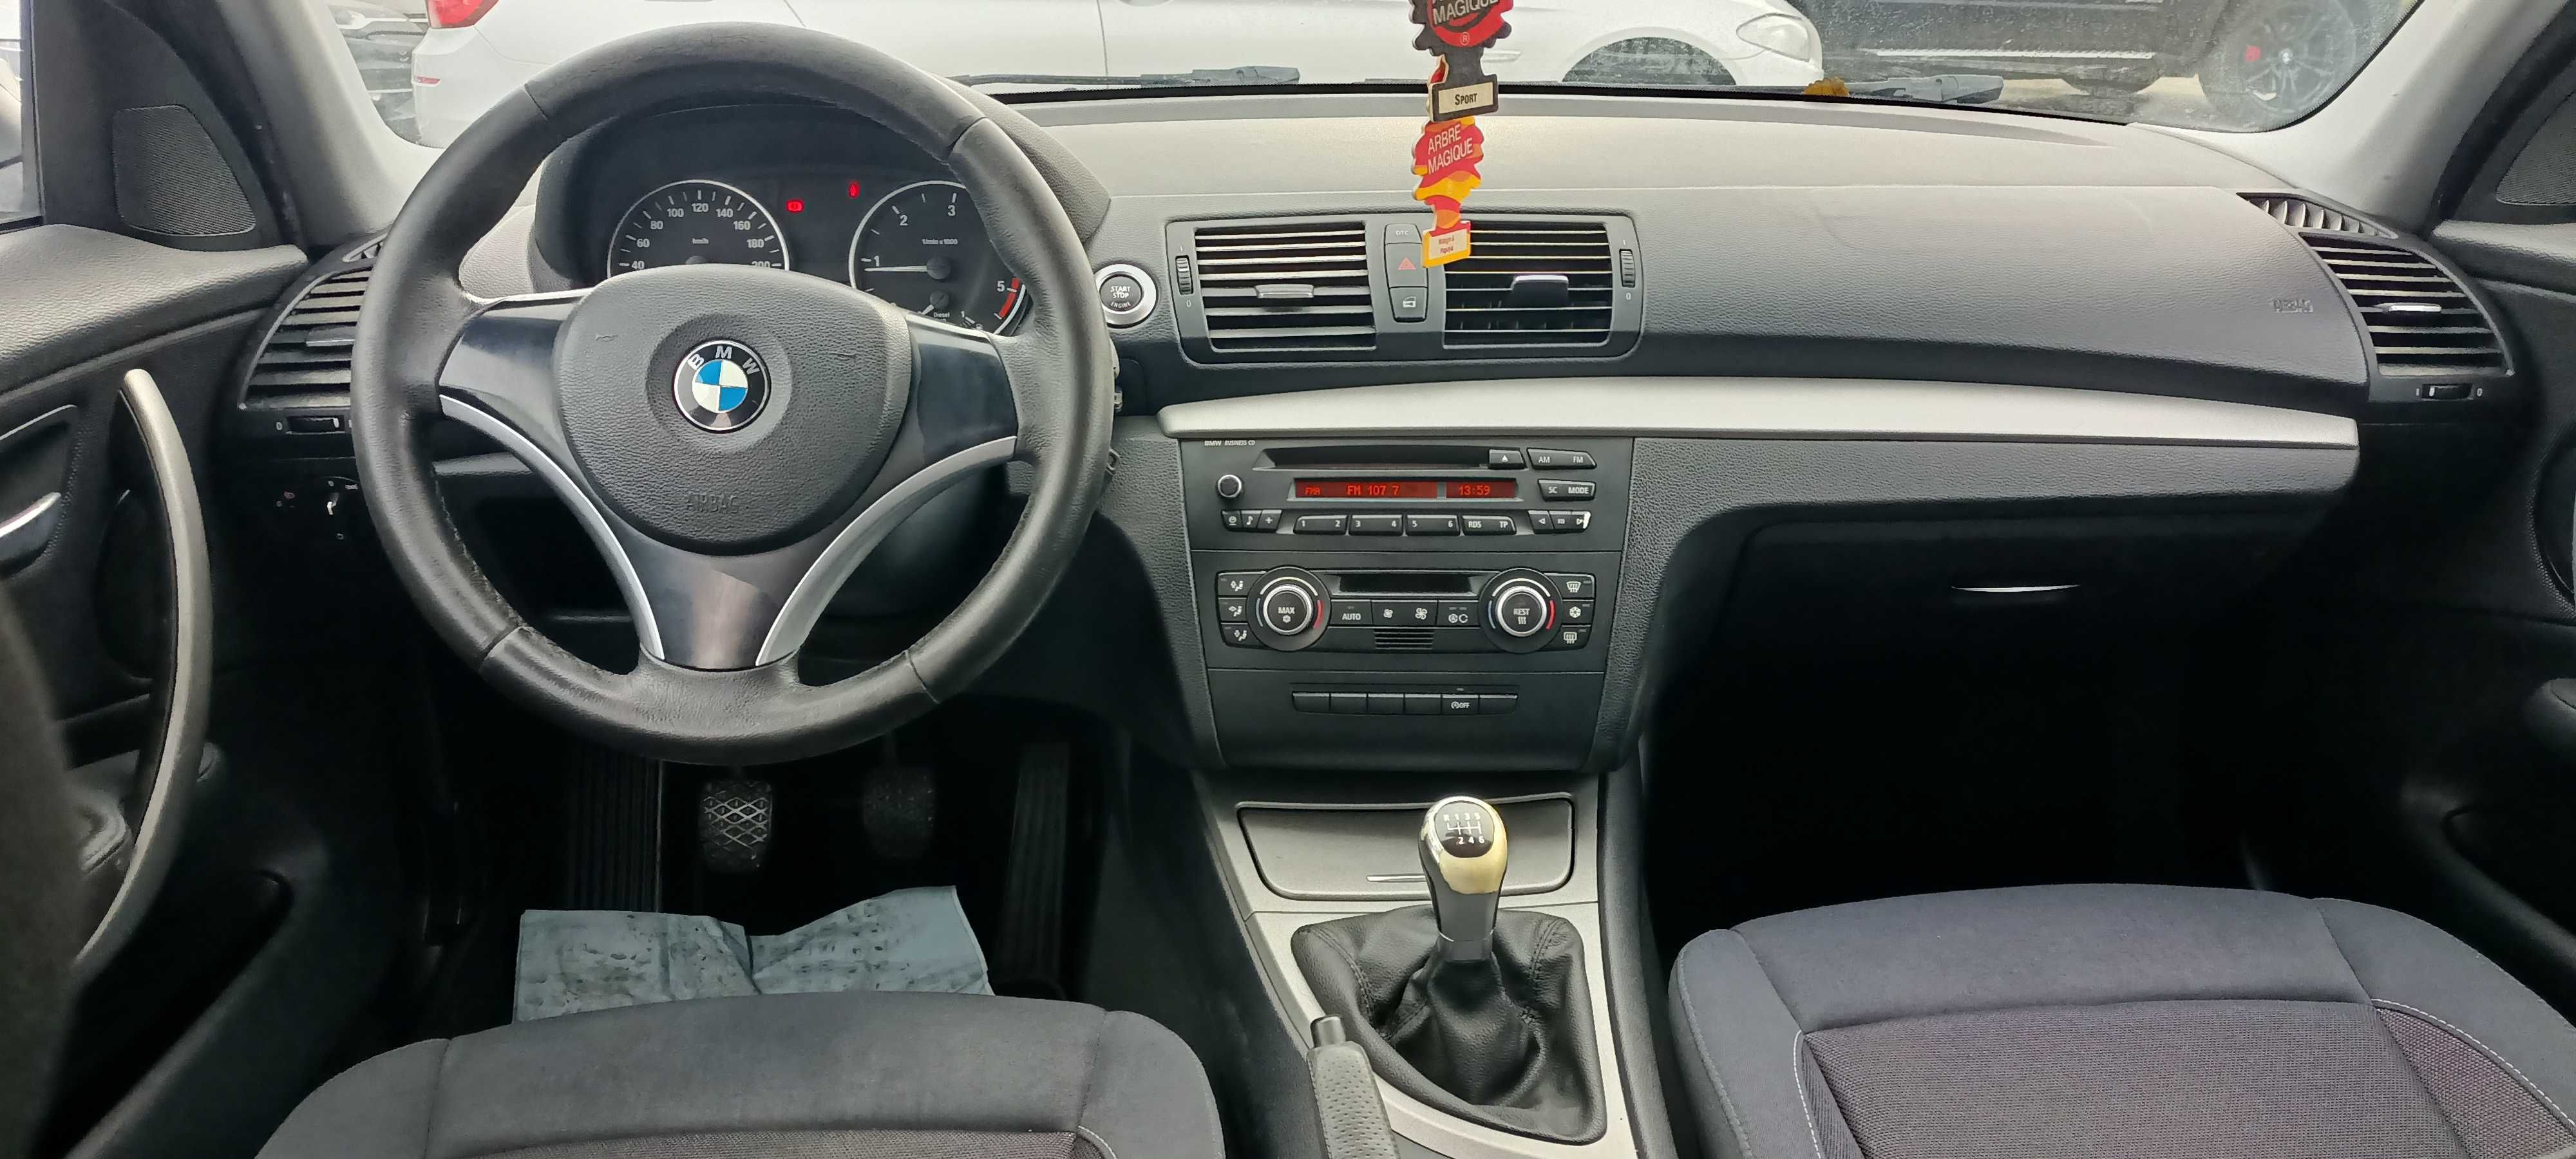 Bmw 116d - 2009 - Rate fixe -